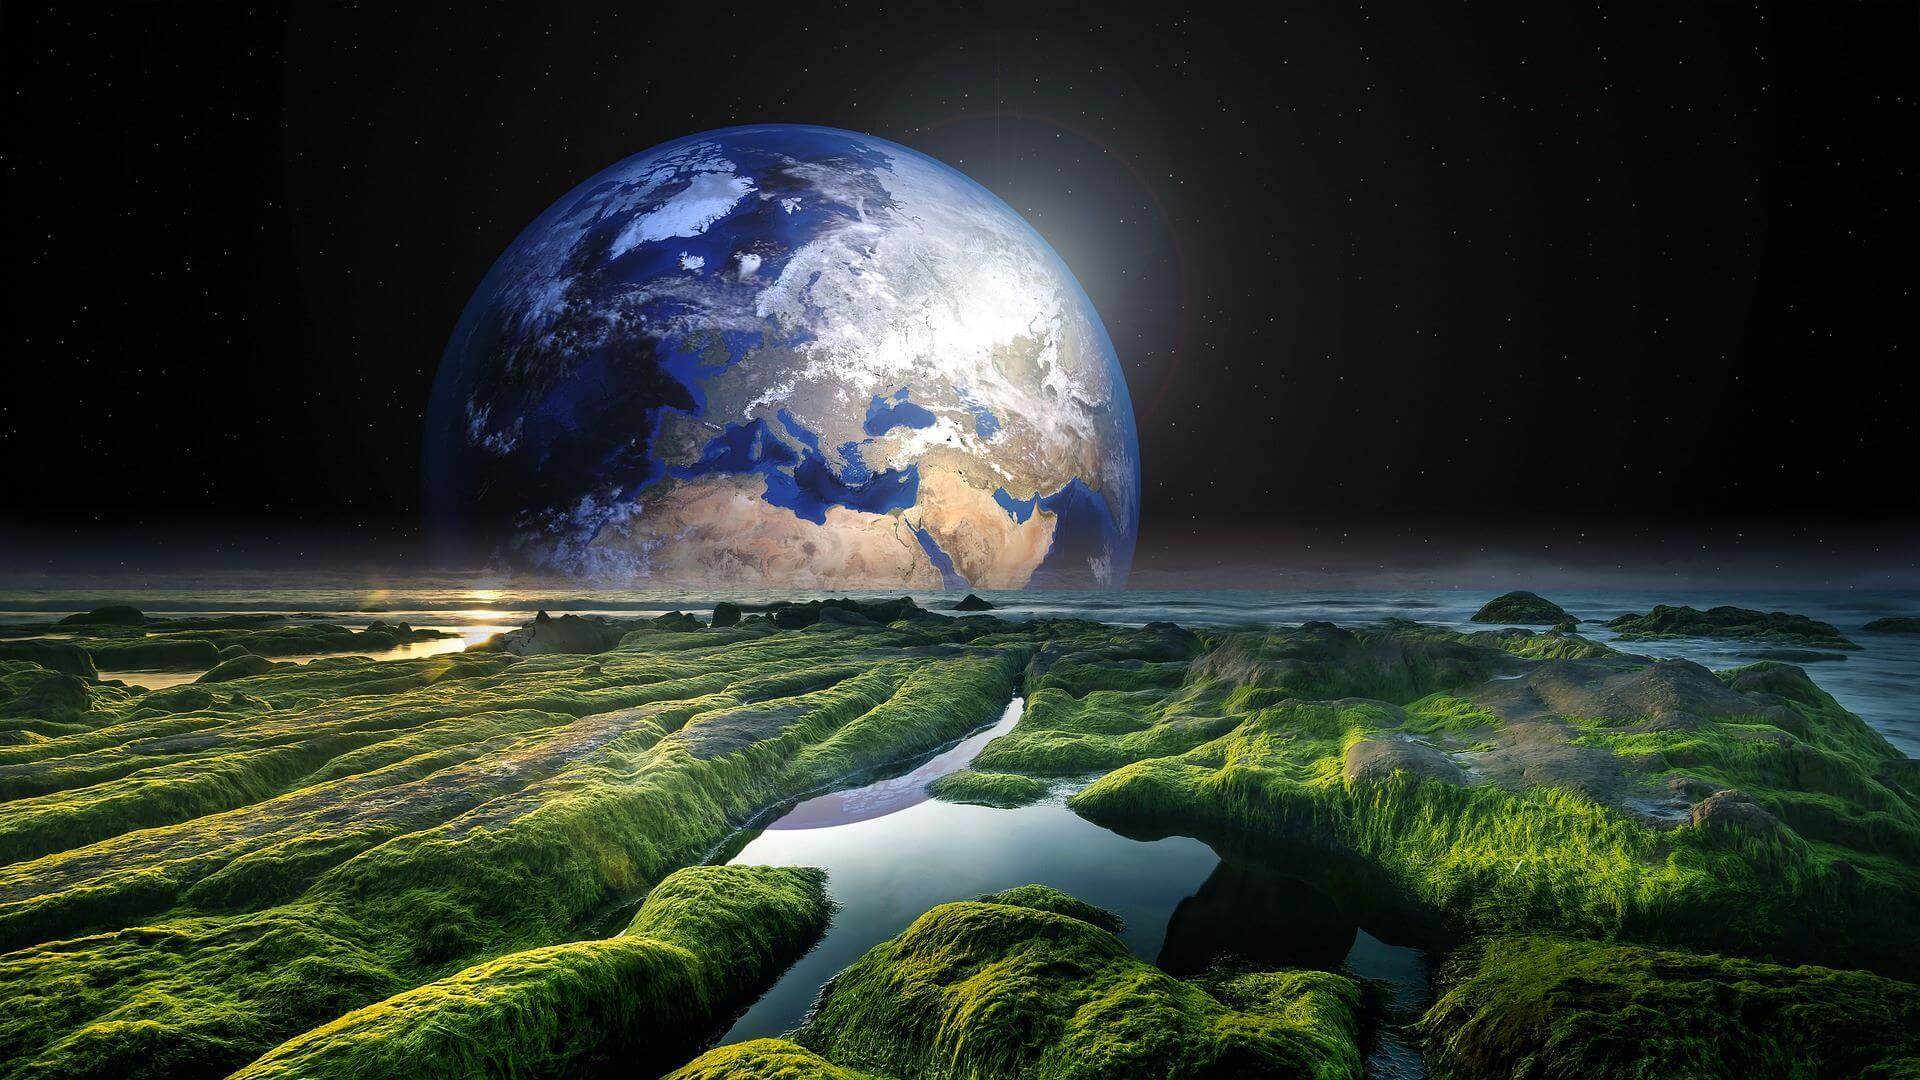 The Earth floating in the night sky with the vast land spread below.